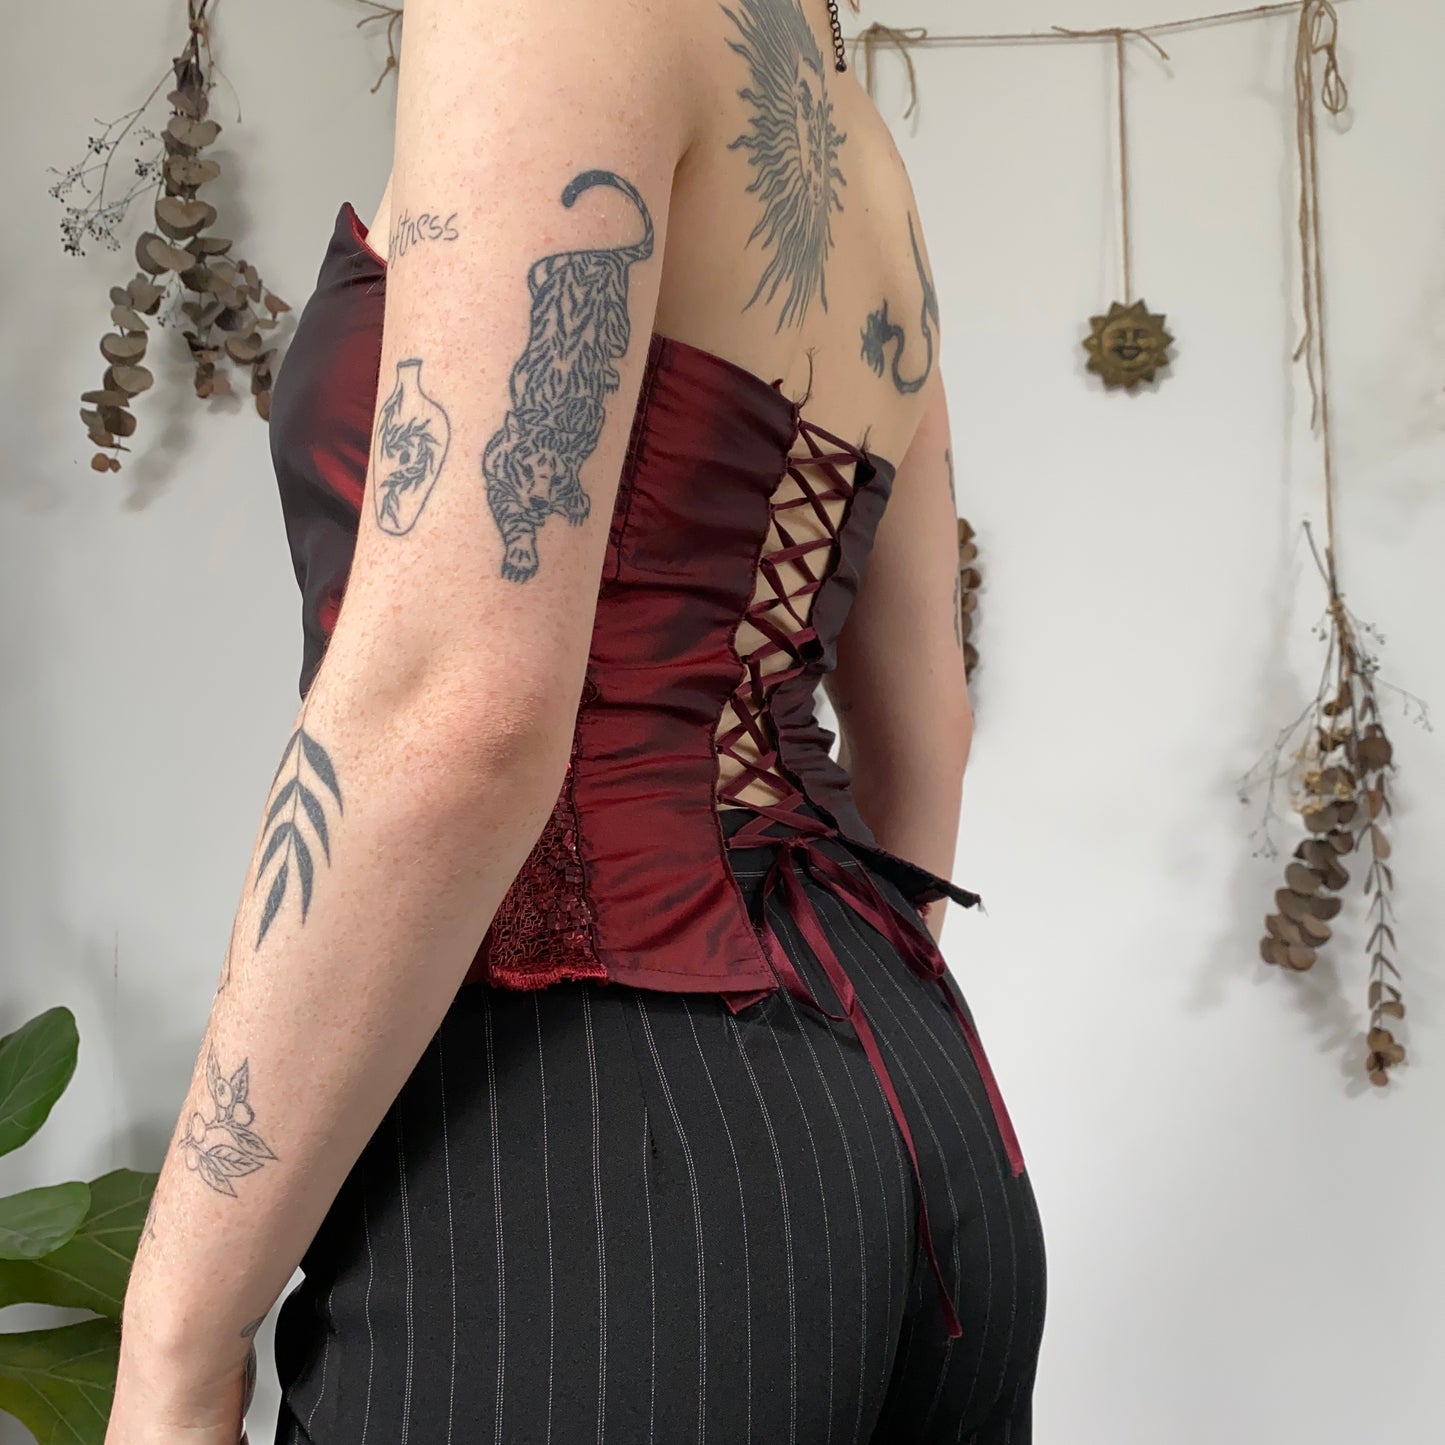 Red corset - size S